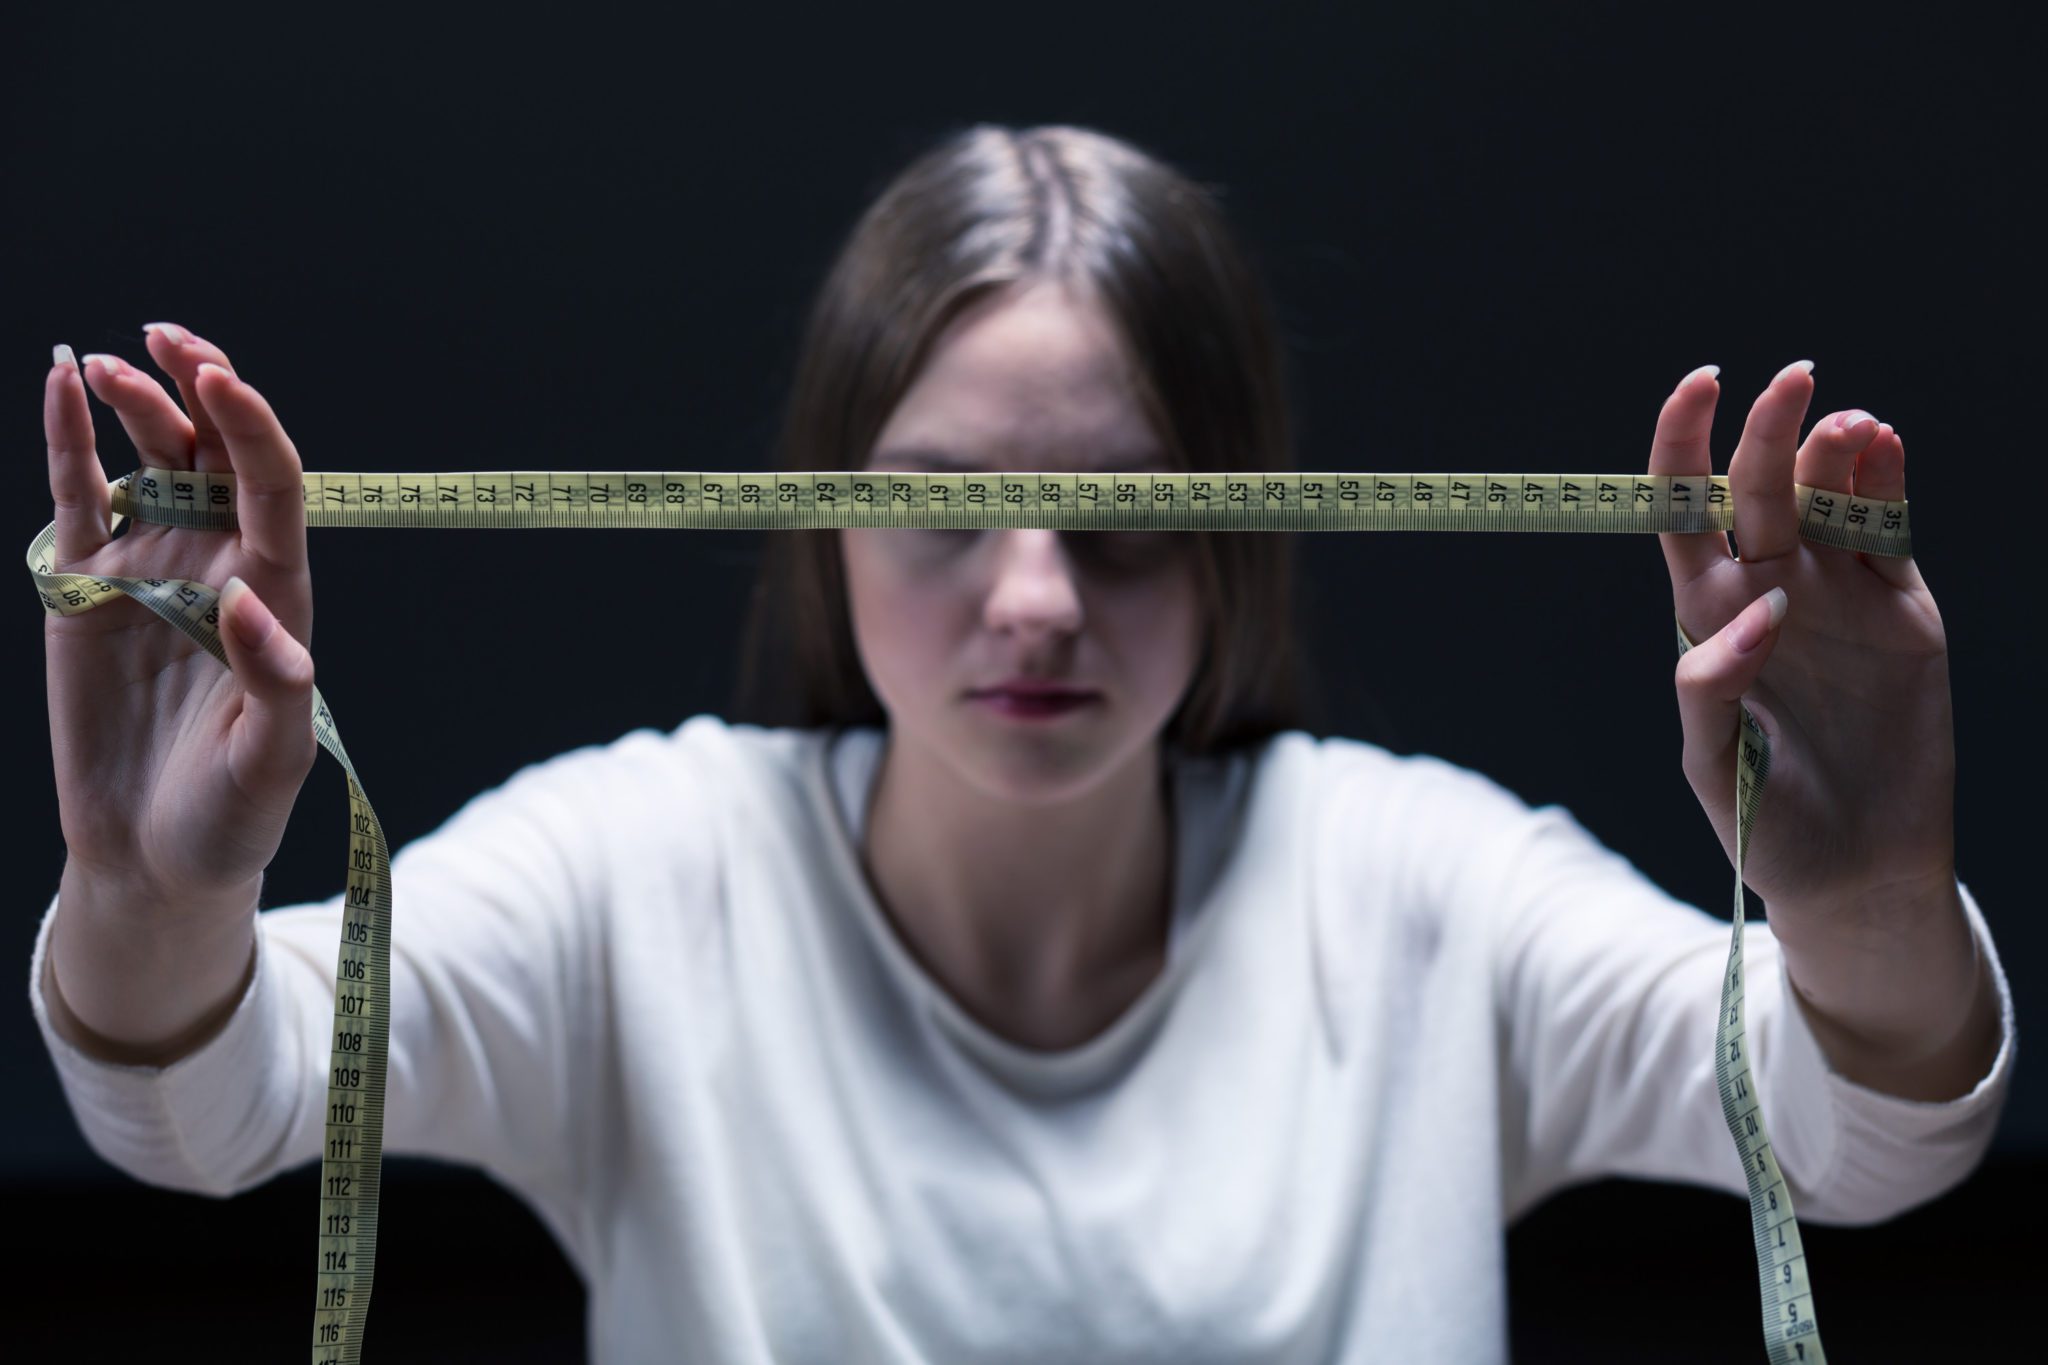 Teen girl in shadows stretching out tape measure in front of her face